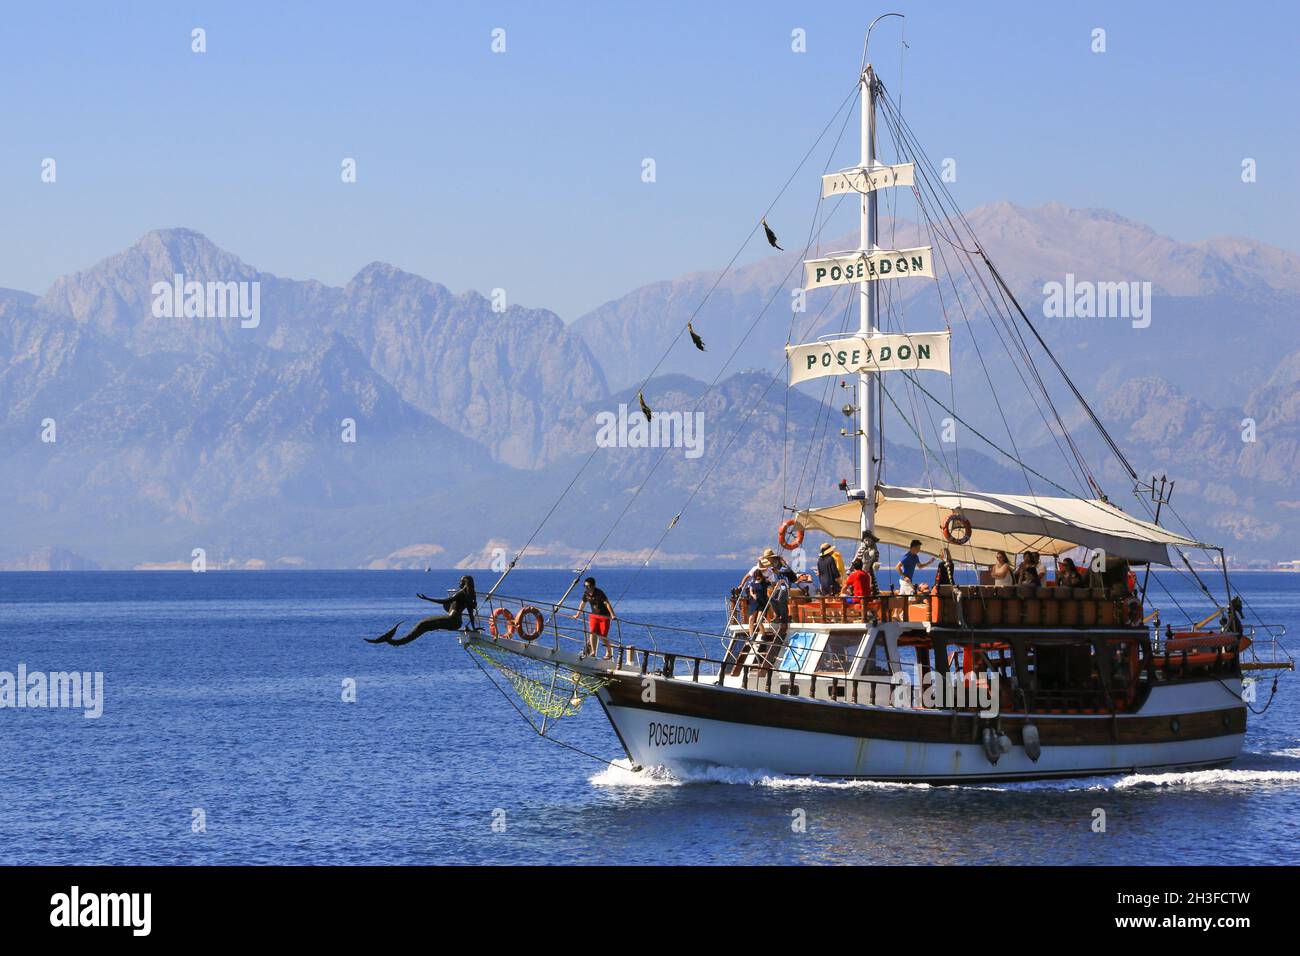 The tourist boat Poseidon is heading southest along the Antalya coast in southern Turkey with a group of tourists. A mermaid figurehead adorns the bow. Stock Photo